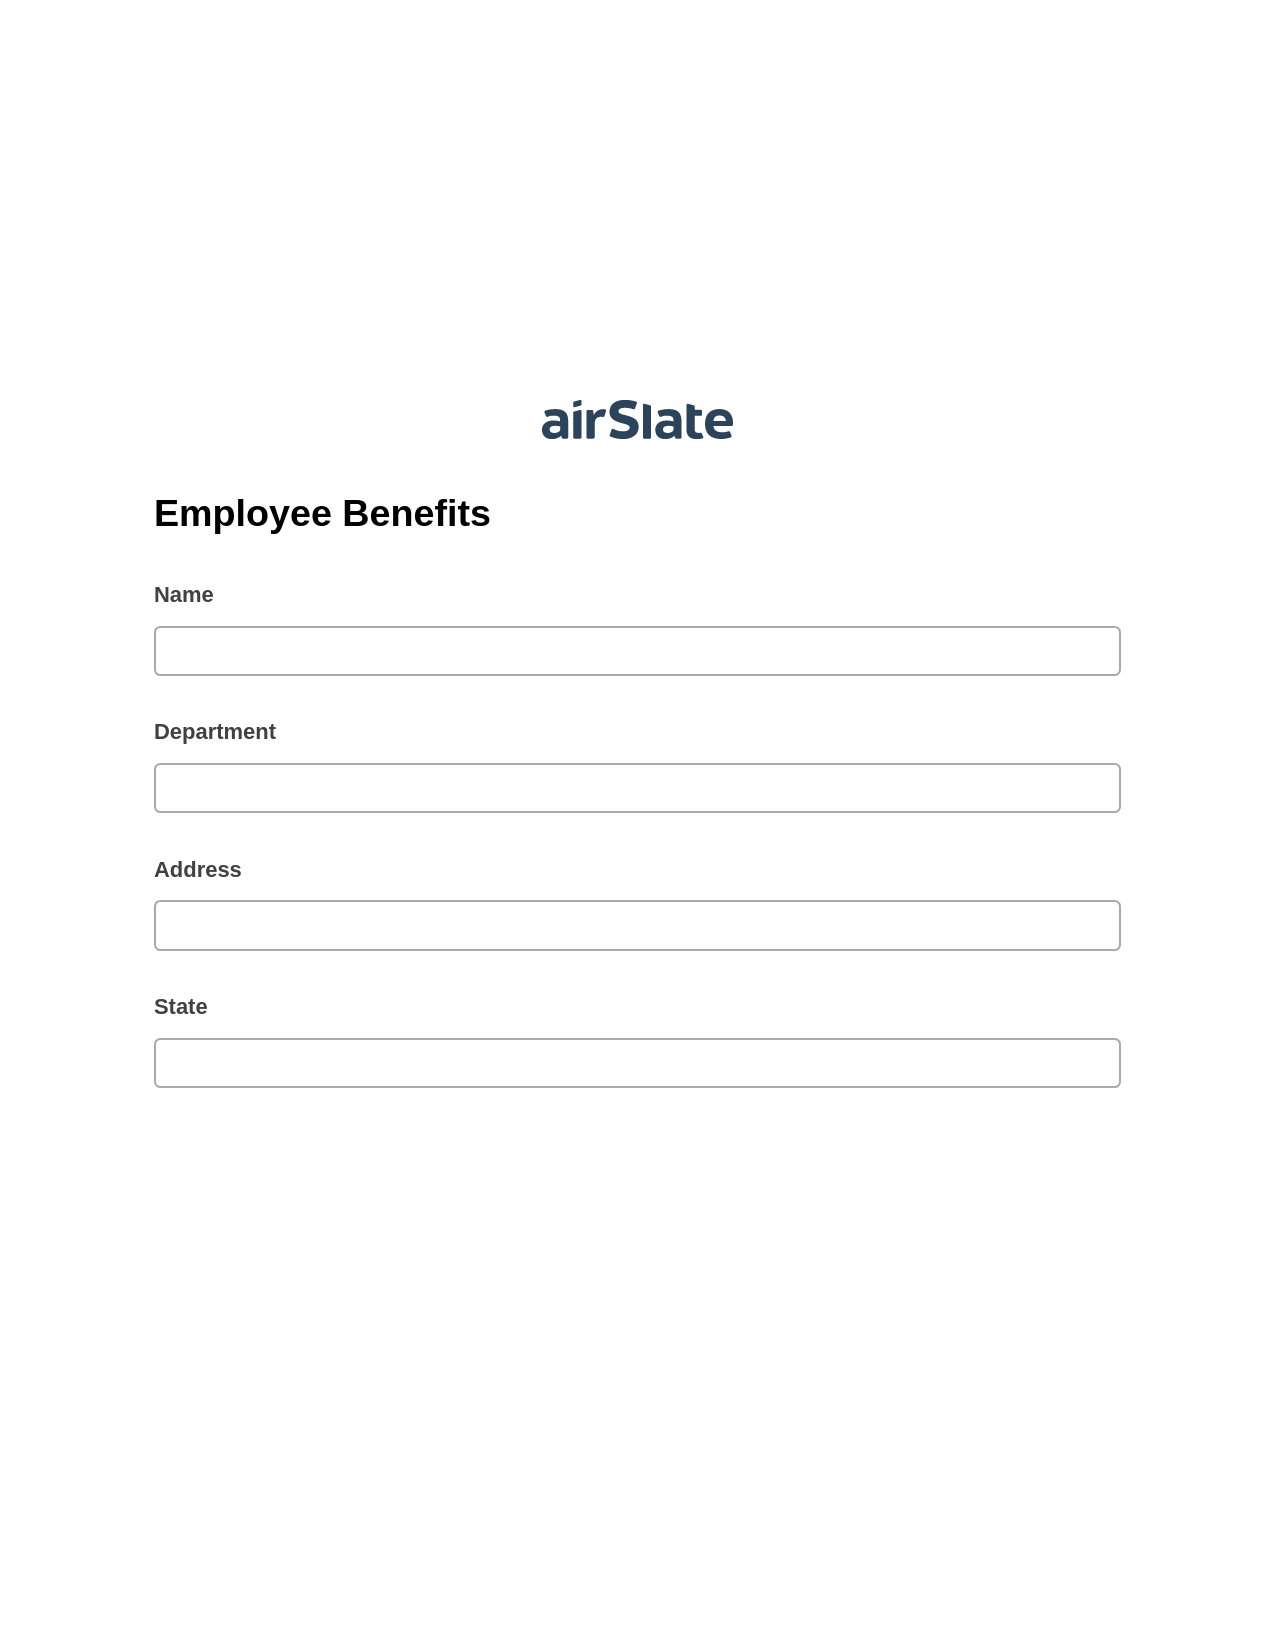 Multirole Employee Benefits Pre-fill from NetSuite Records Bot, Unassign Role Bot, OneDrive Bot